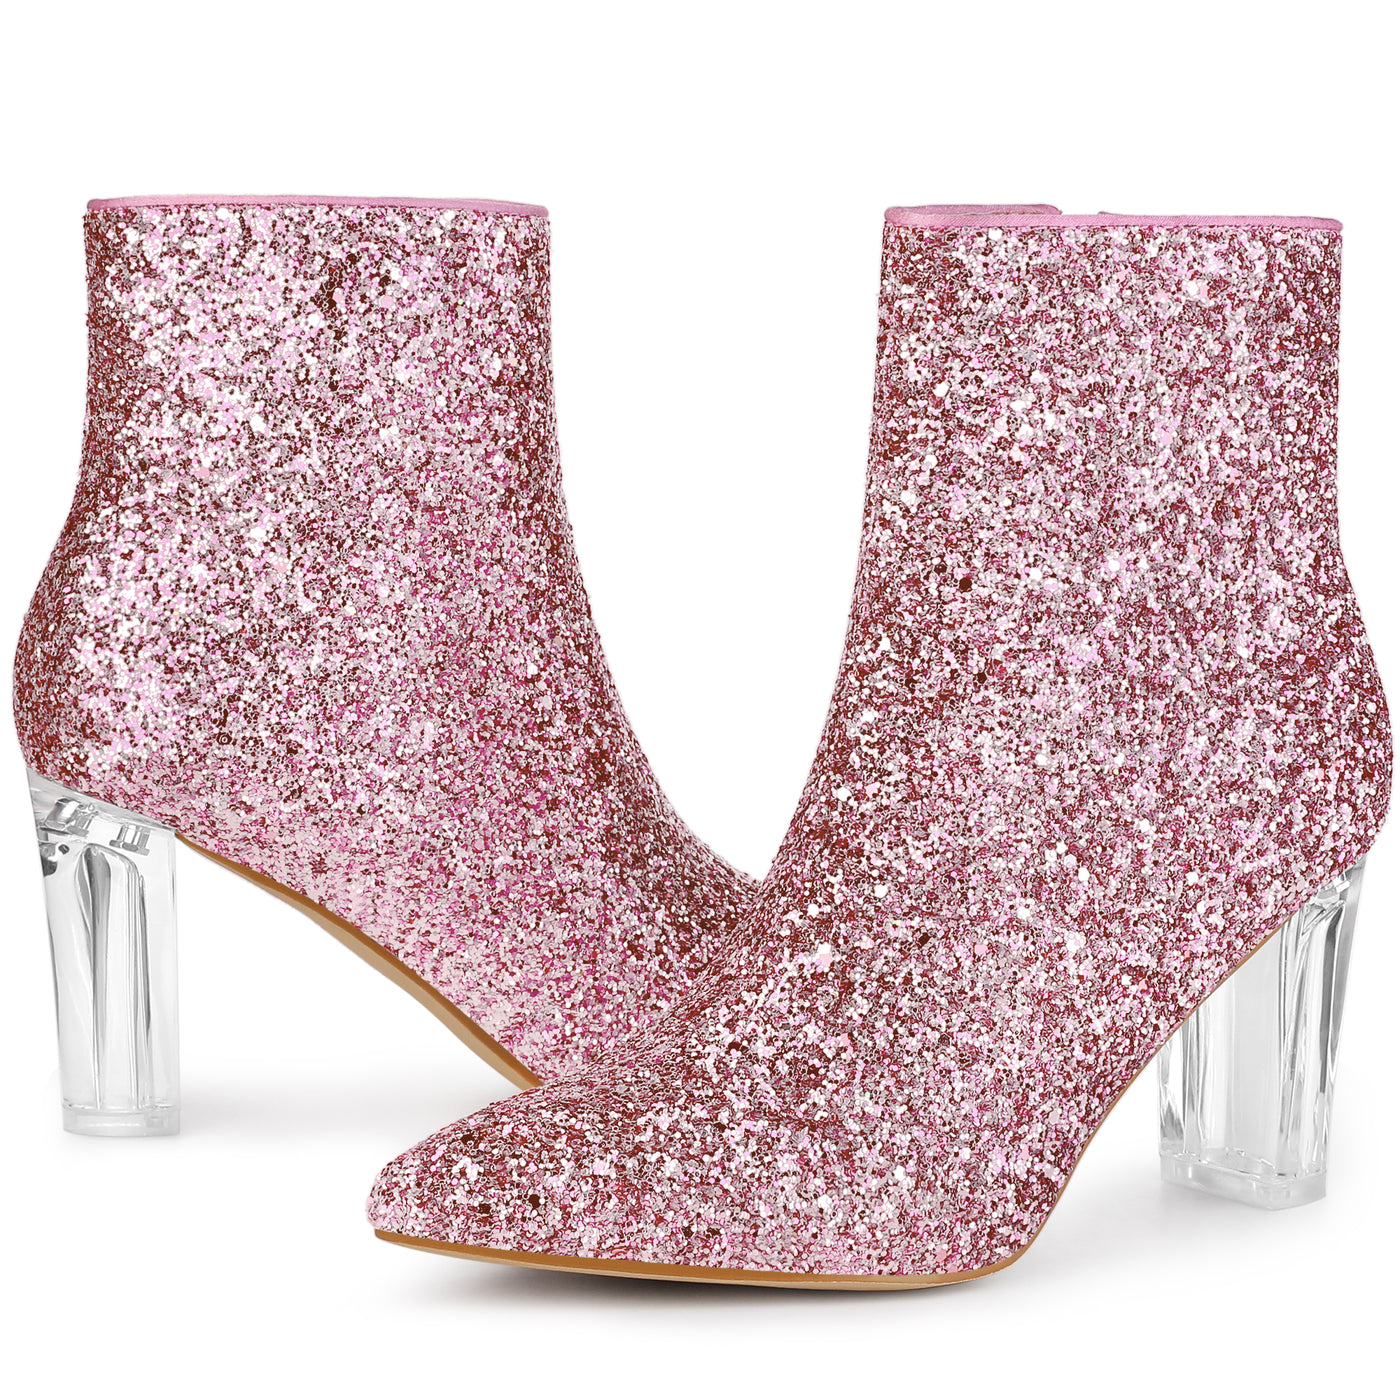 Bublédon Perphy Clear Block Heel Sparkly Glitter Ankle Boots for Women